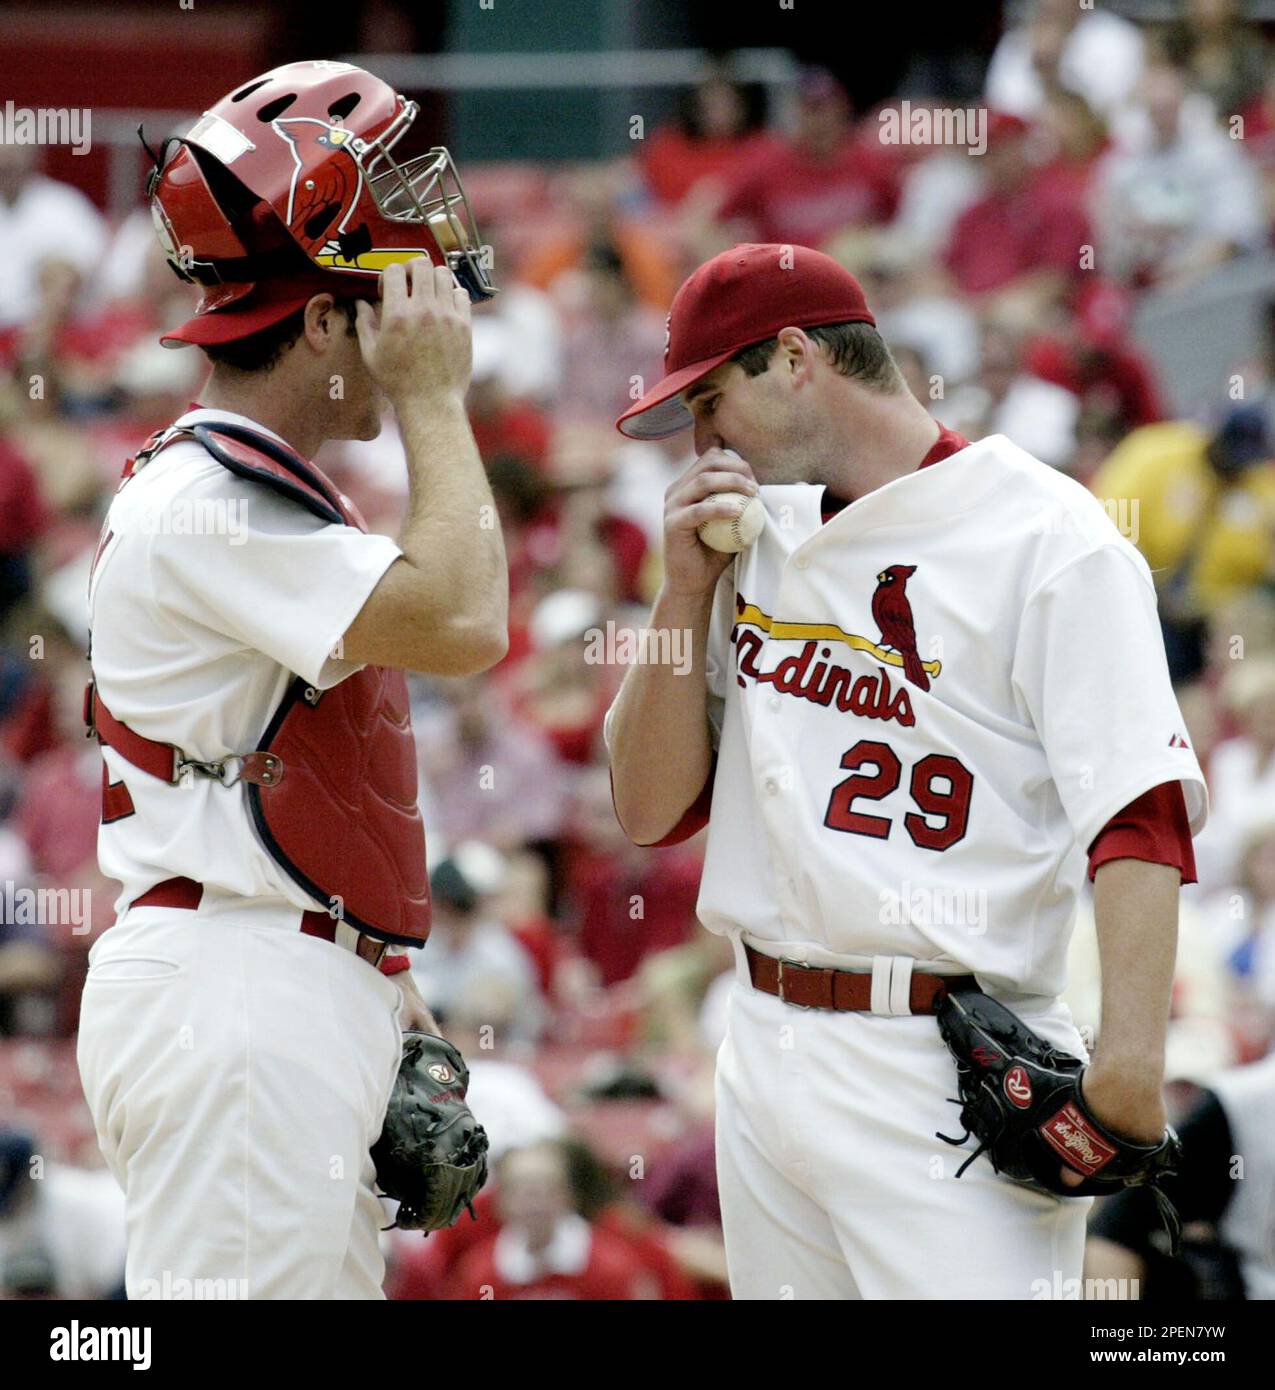 St. Louis Cardinals catcher Mike Matheny, left, and starting pitcher Chris  Carpenter (29) confer on the mound in the fourth inning against the Arizona  Diamondbacks, Saturday, Sept. 18, 2004, in St. Louis.